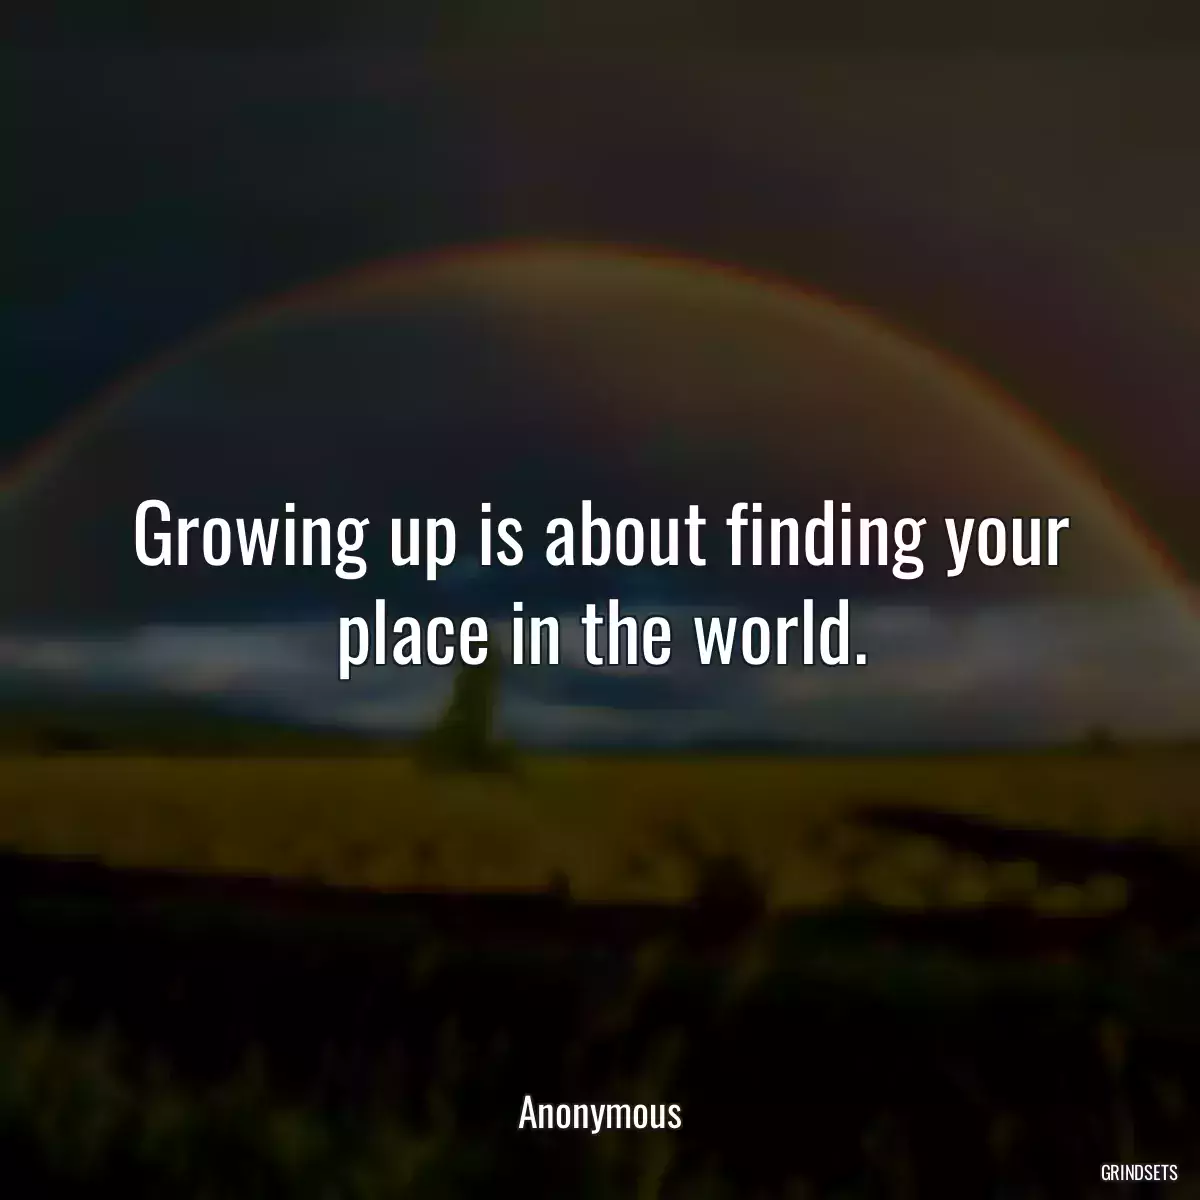 Growing up is about finding your place in the world.